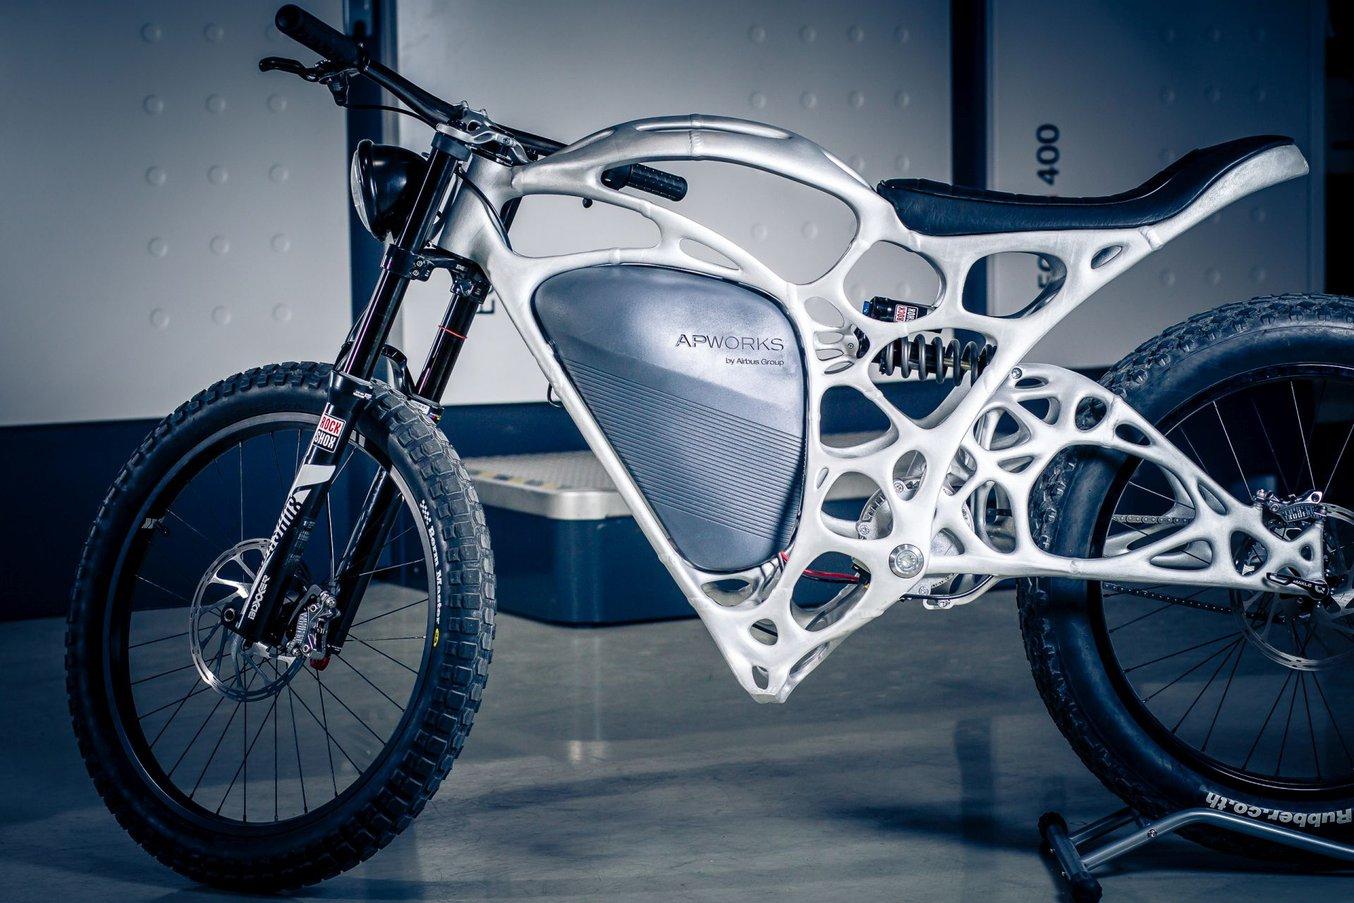 motorcycle made with generative design